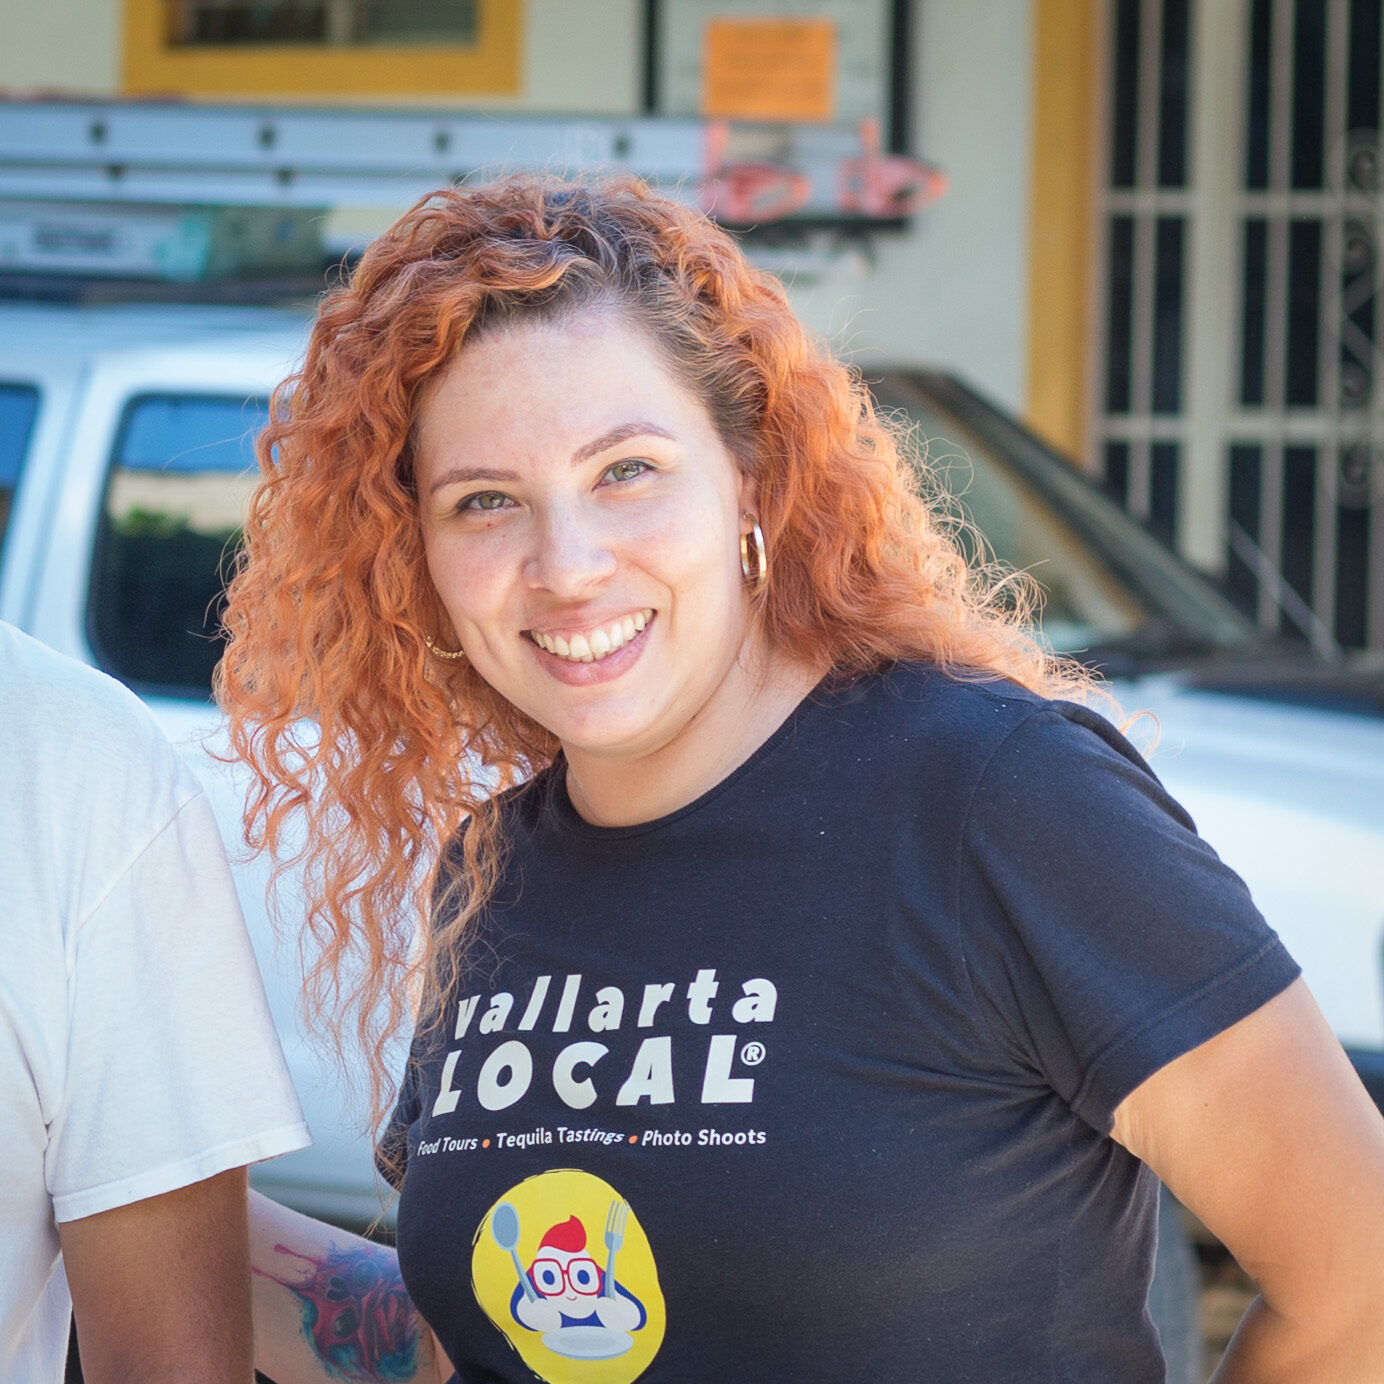 Mexican Woman wearing a black tshirt with the logo of a Food Tour in Puerto Vallarta